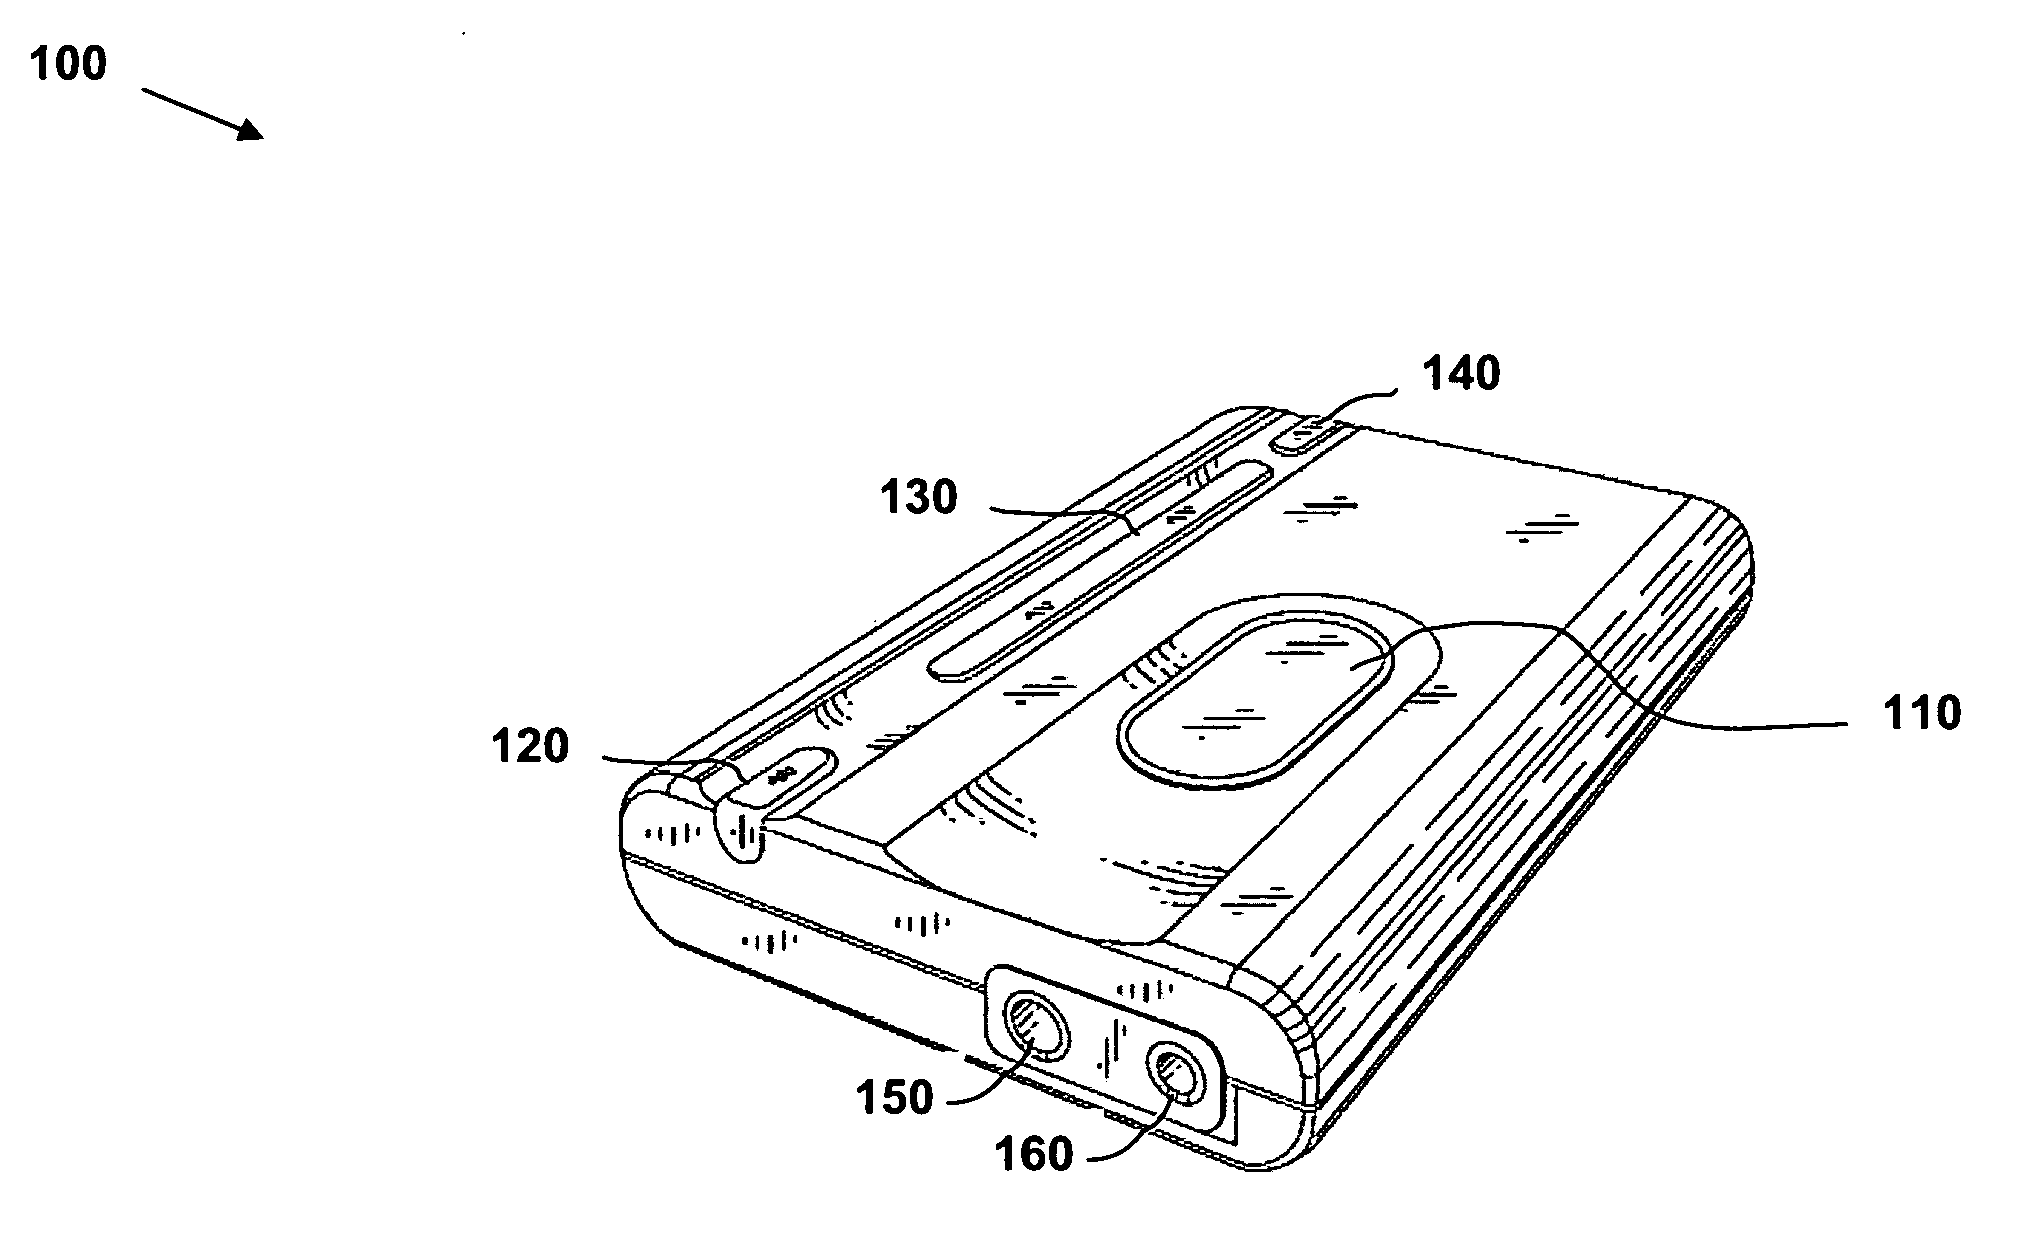 Portable device and method for measuring heart rate